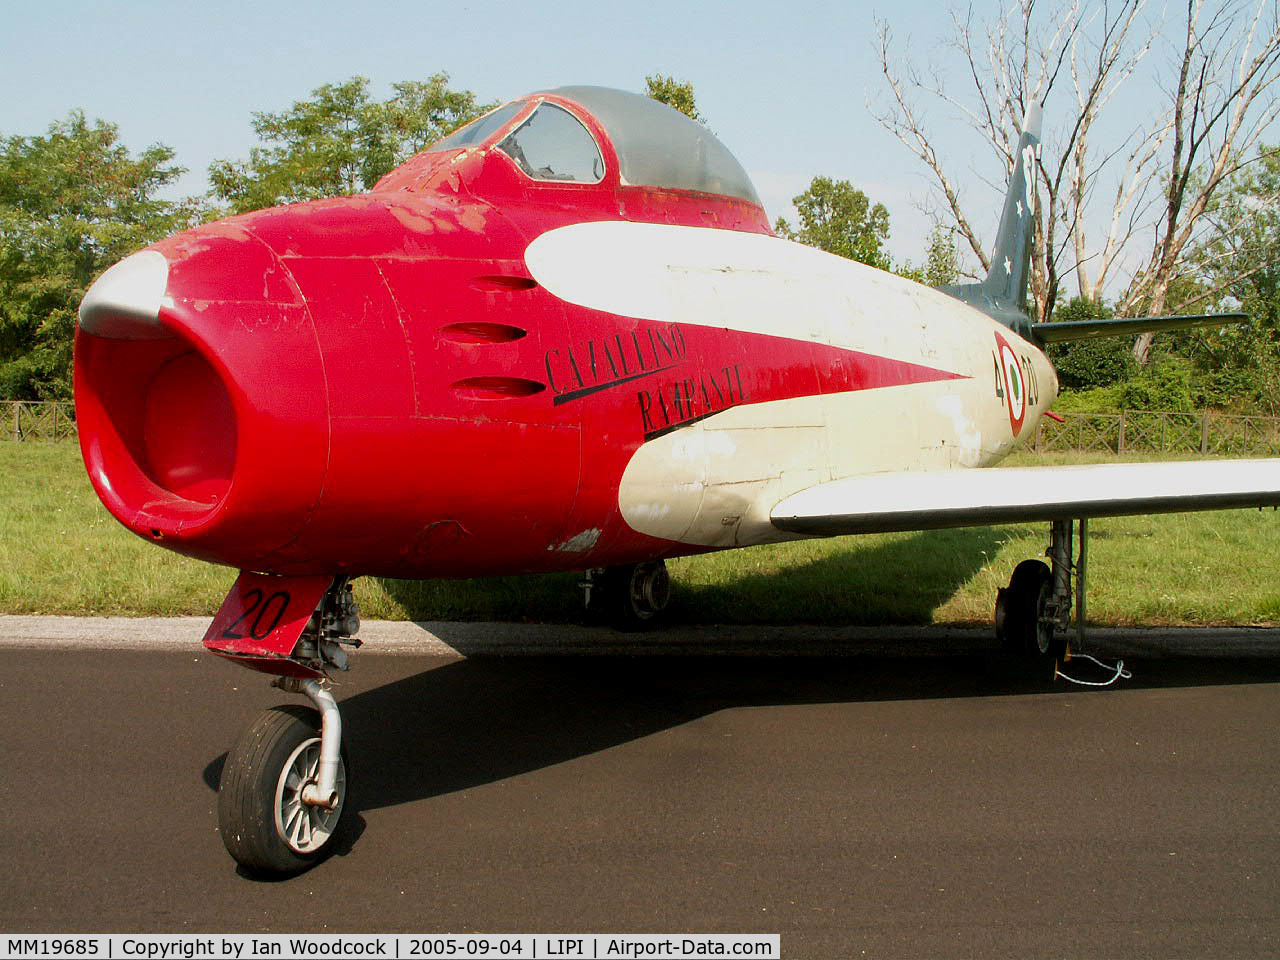 MM19685, Canadair CL-13A Sabre C/N 585, Canadair CL-13A/Preserved/Rivolto-Udine